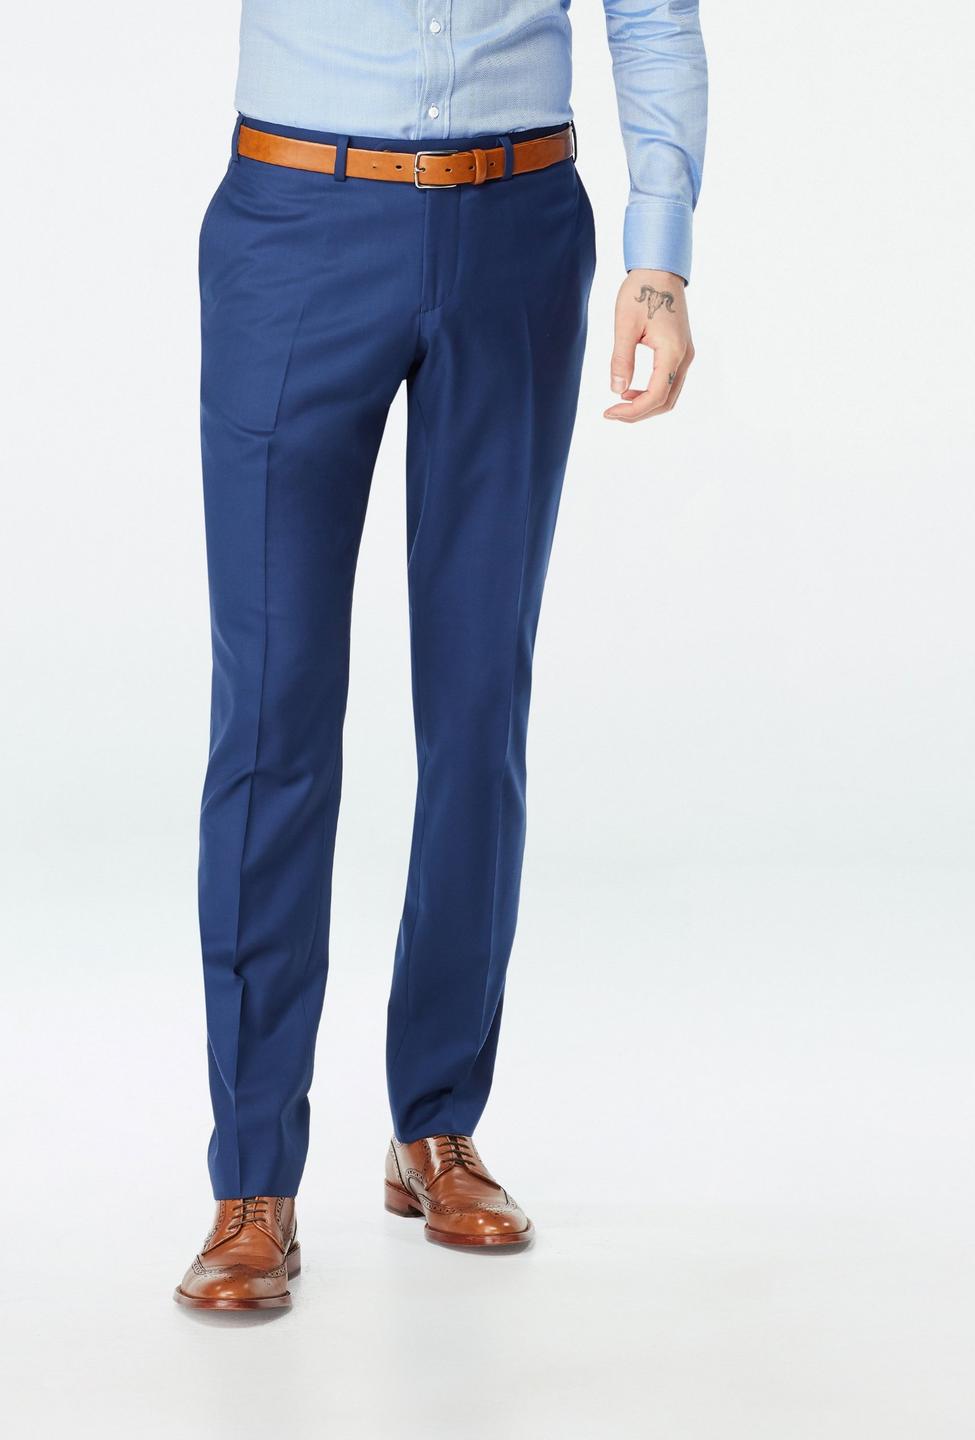 Blue pants - Highbridge Solid Design from Luxury Indochino Collection